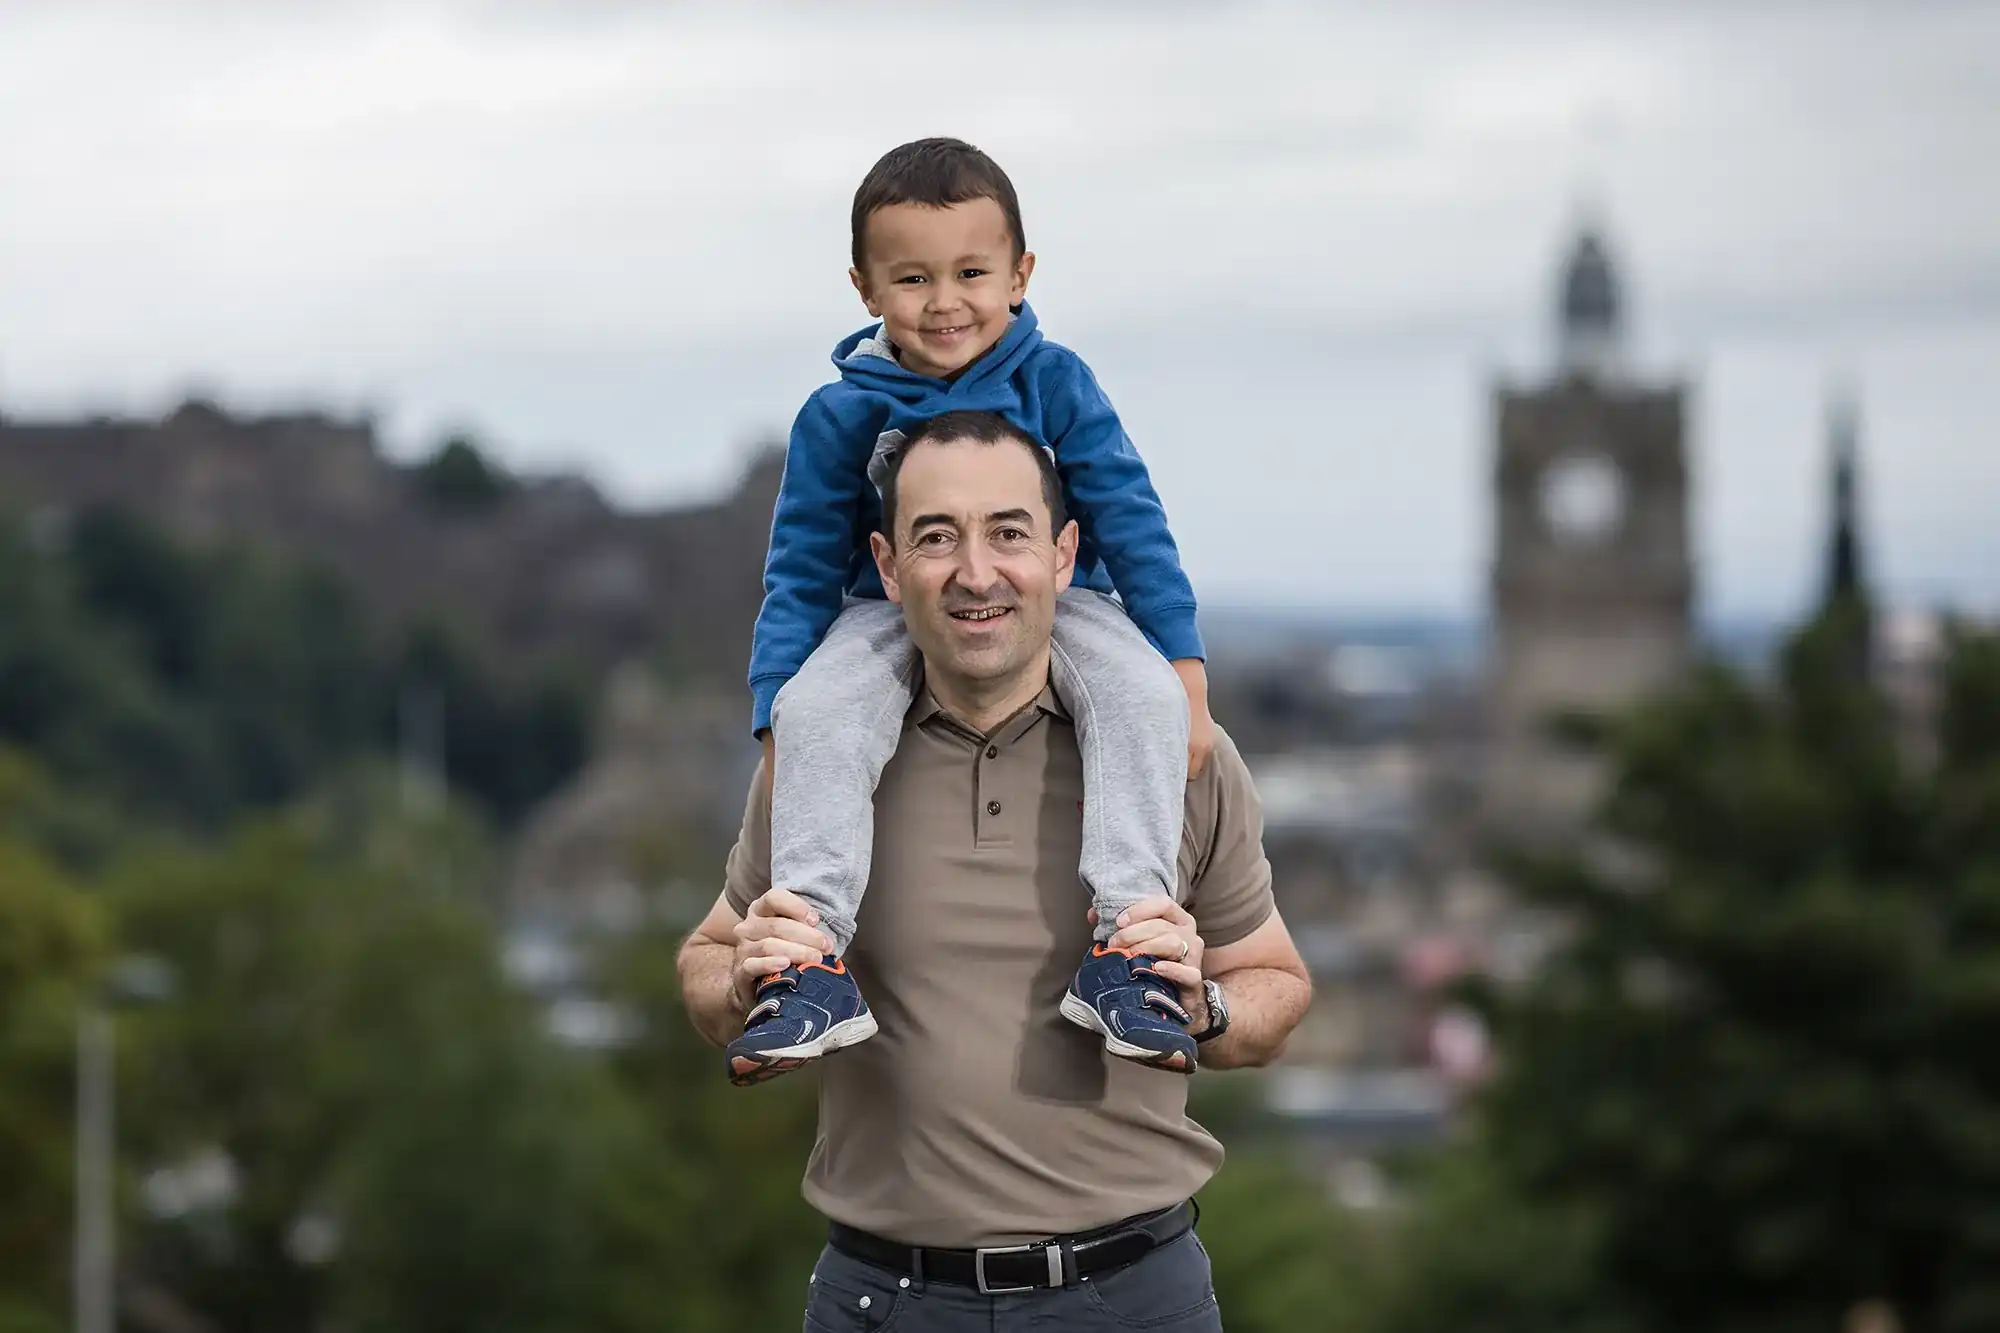 A man carries a smiling child on his shoulders outdoors. A blurred building and greenery are visible in the background.